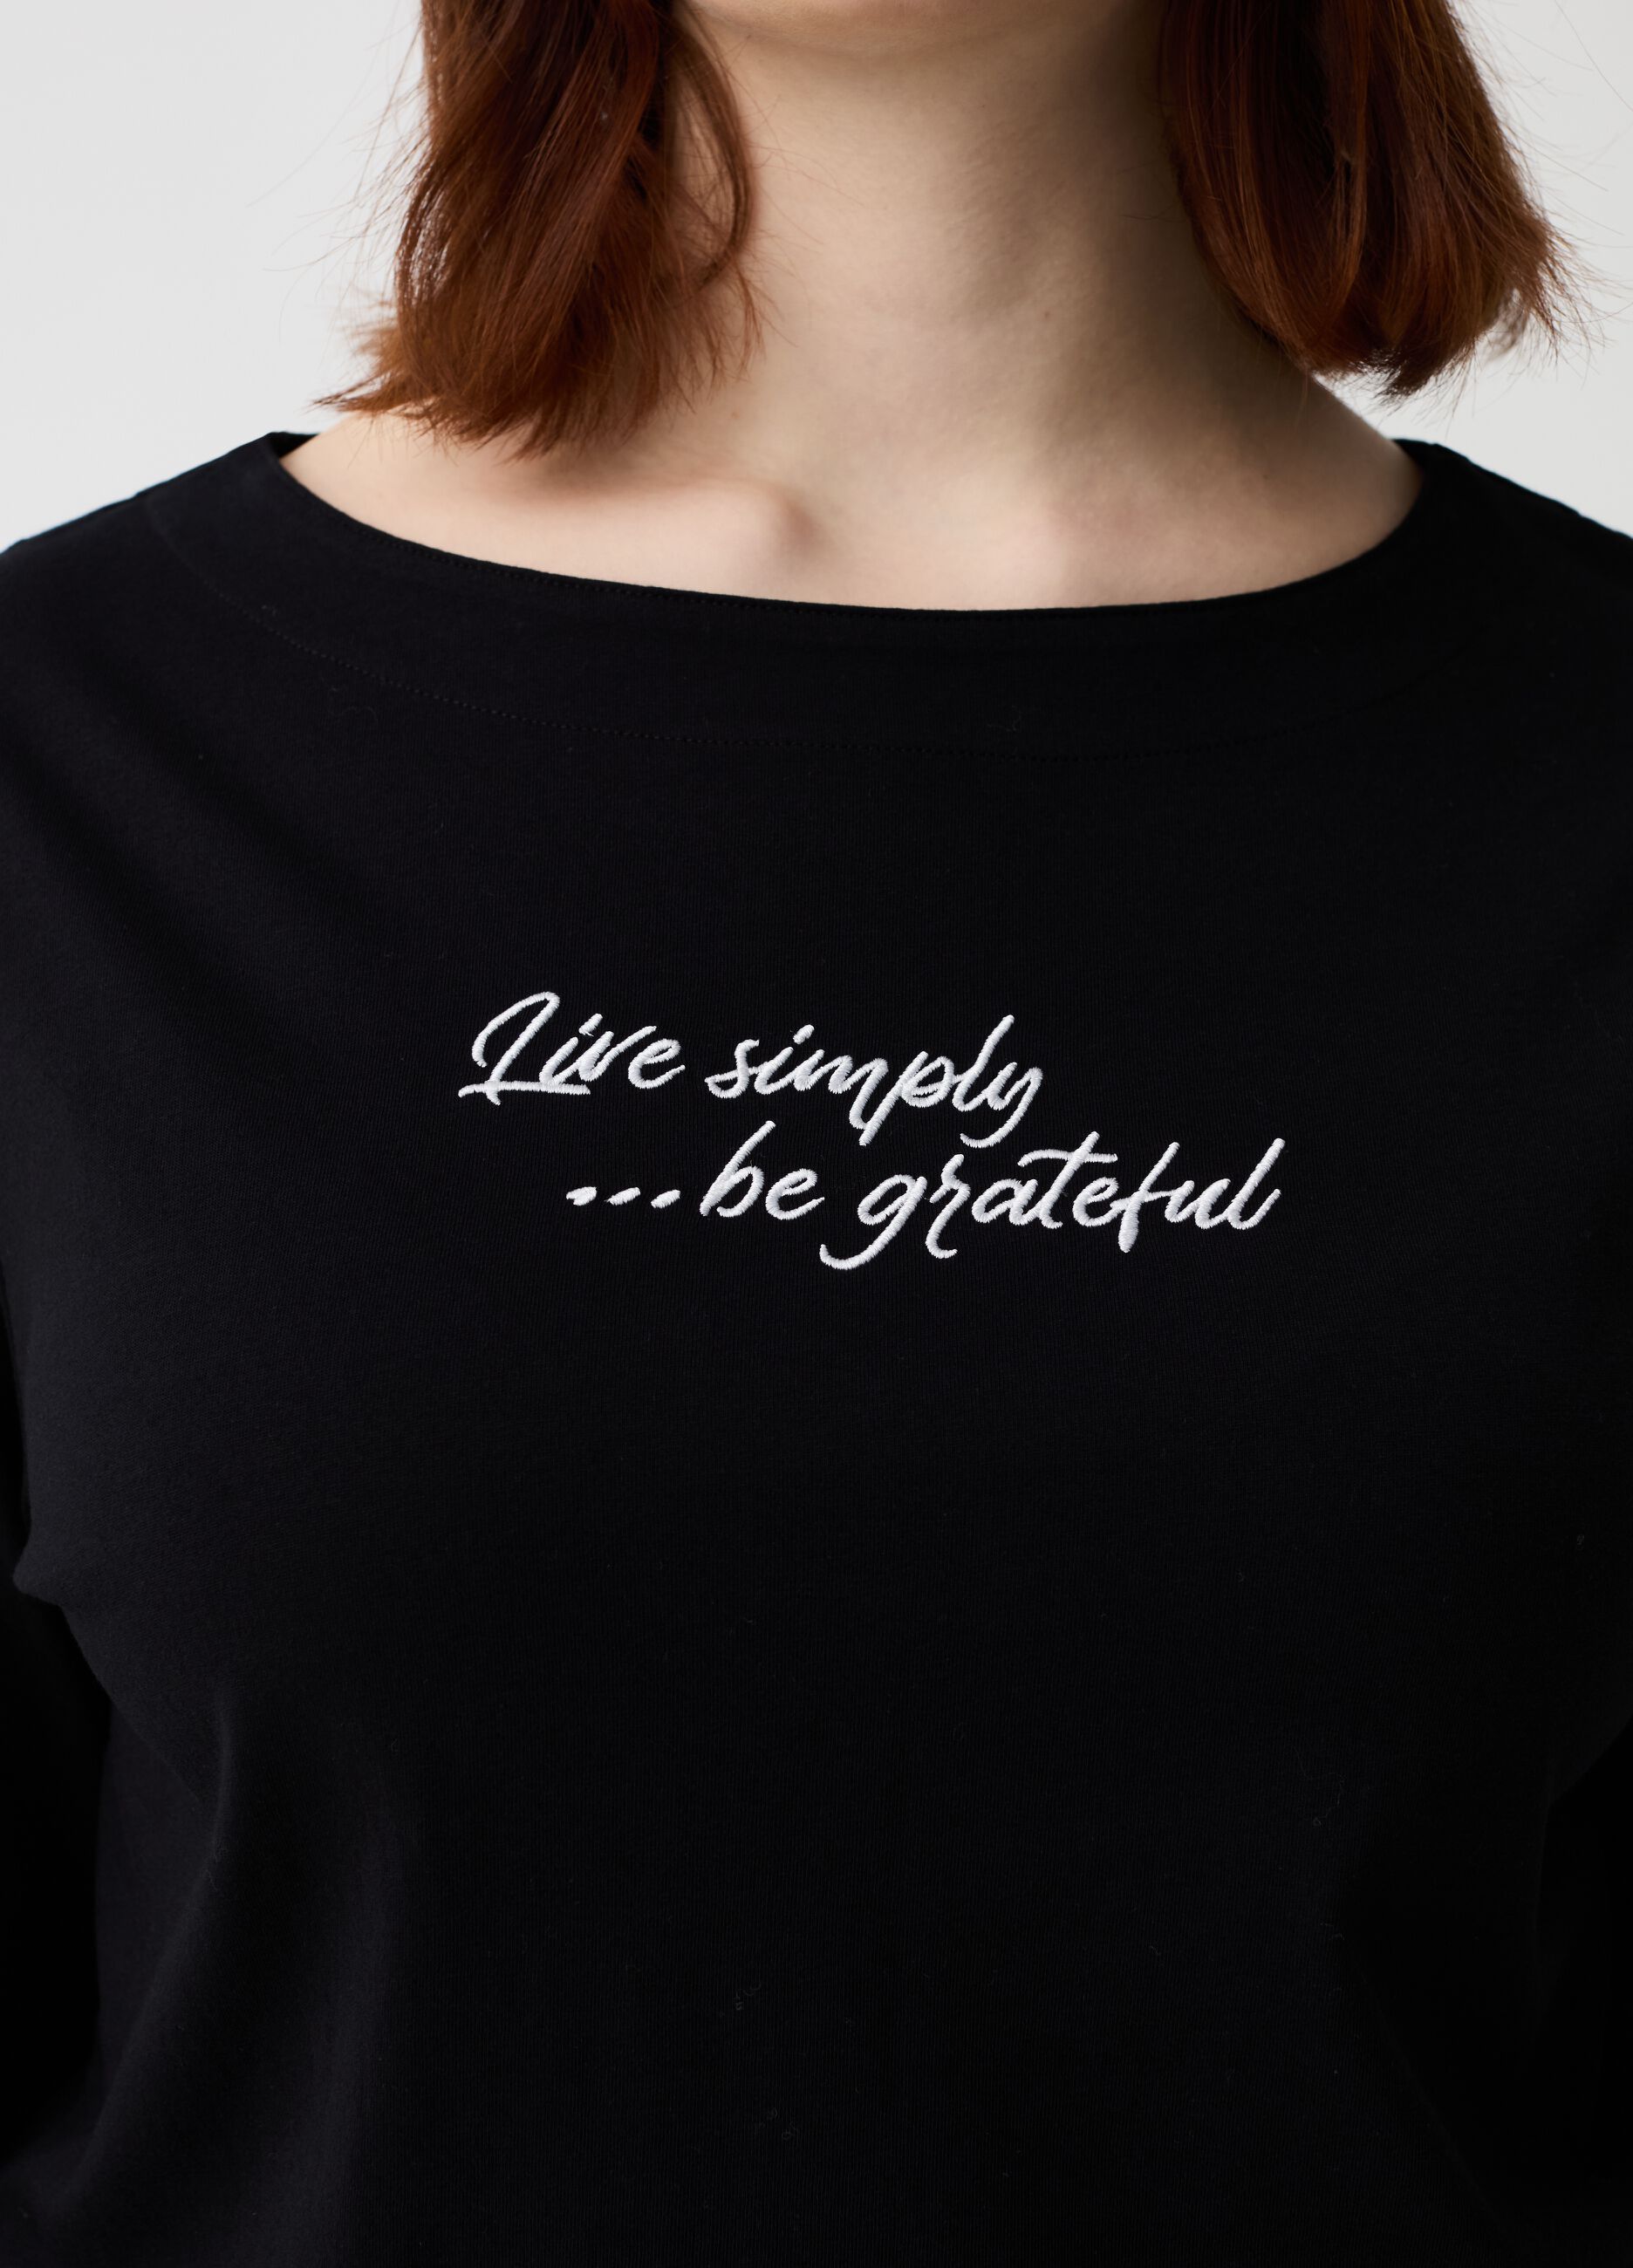 Curvy long-sleeved T-shirt with embroidery